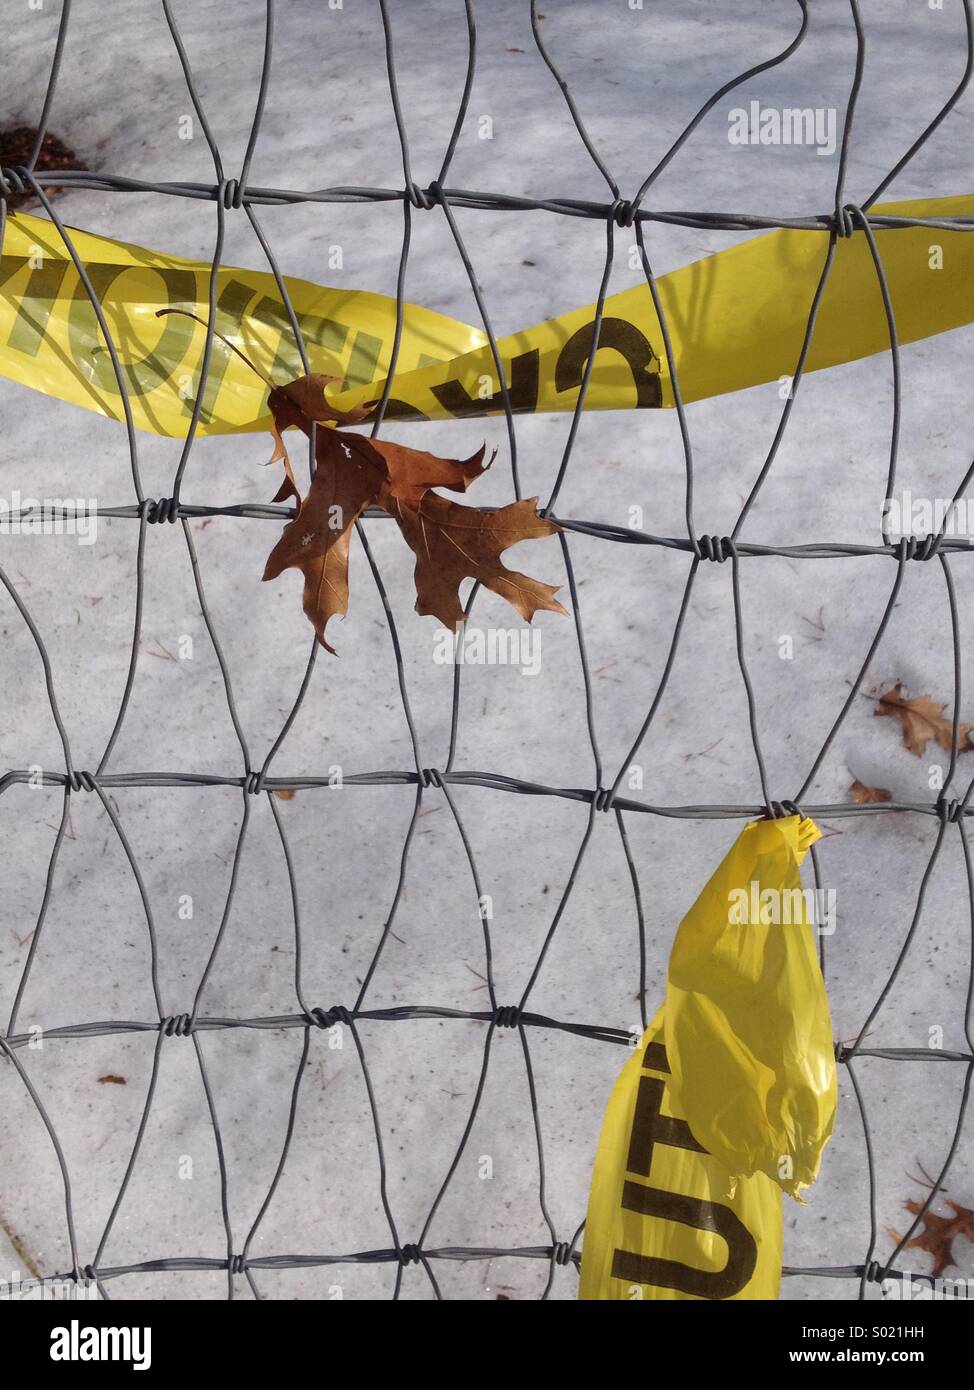 Oak leaf caught near twisted yellow caution tape on wire mesh safety fence in winter Stock Photo